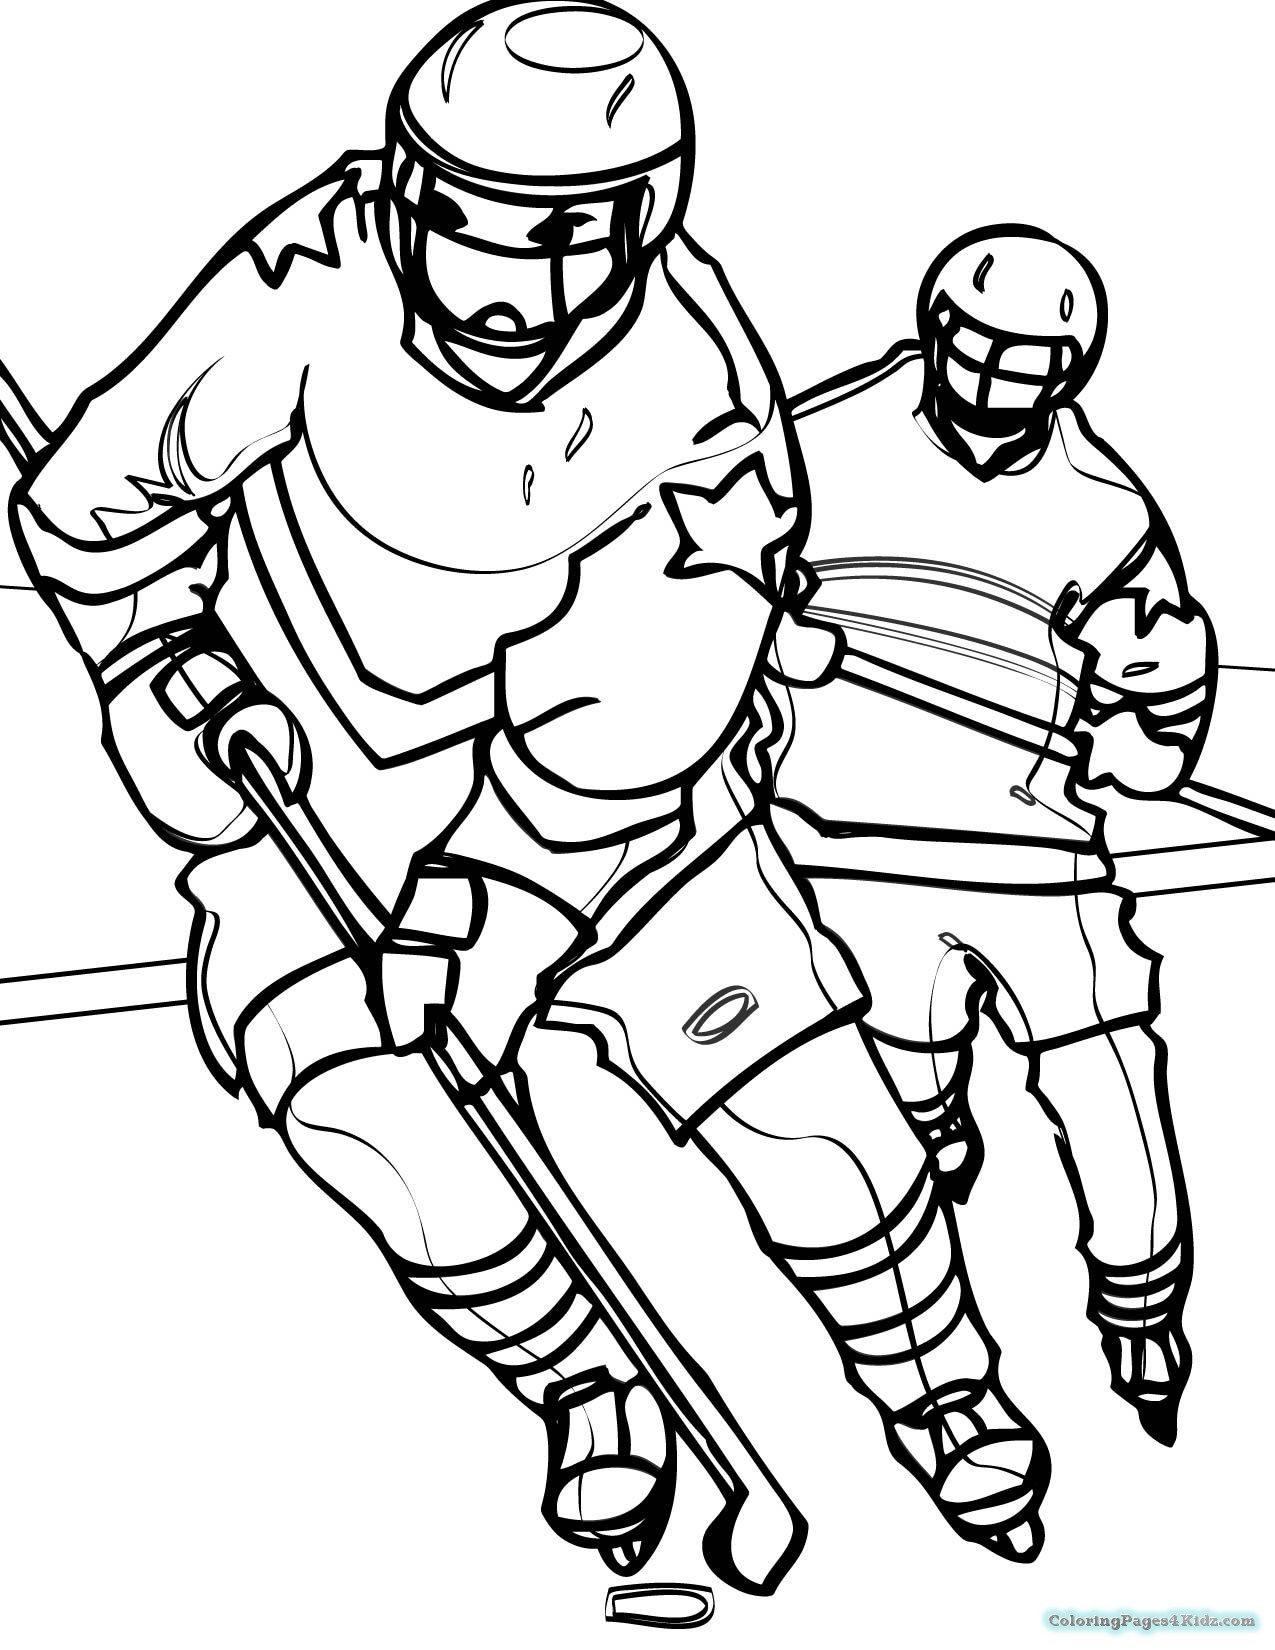 coloring-pages-for-boys-sports-at-getcolorings-free-printable-colorings-pages-to-print-and